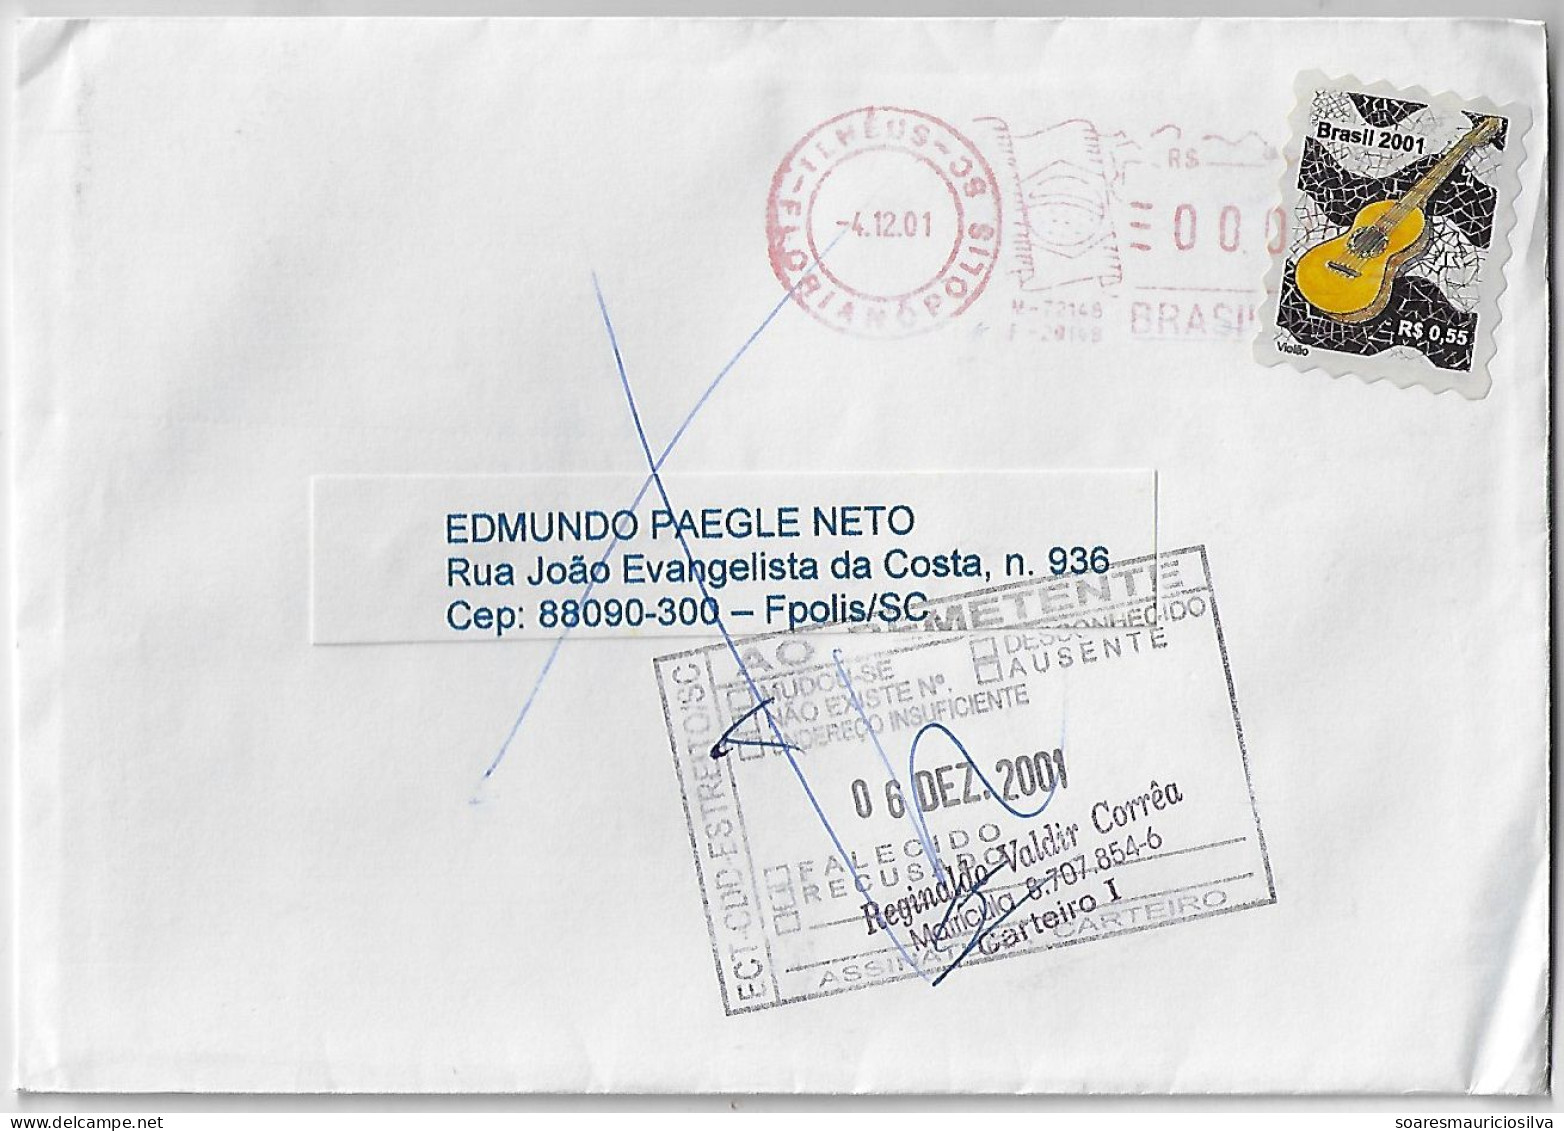 Brazil 2001 Returned Cover Florianópolis Ilhéus Agency Stamp Musical Instrument Guitar Canceled By Meter Stamp Zeo Value - Storia Postale